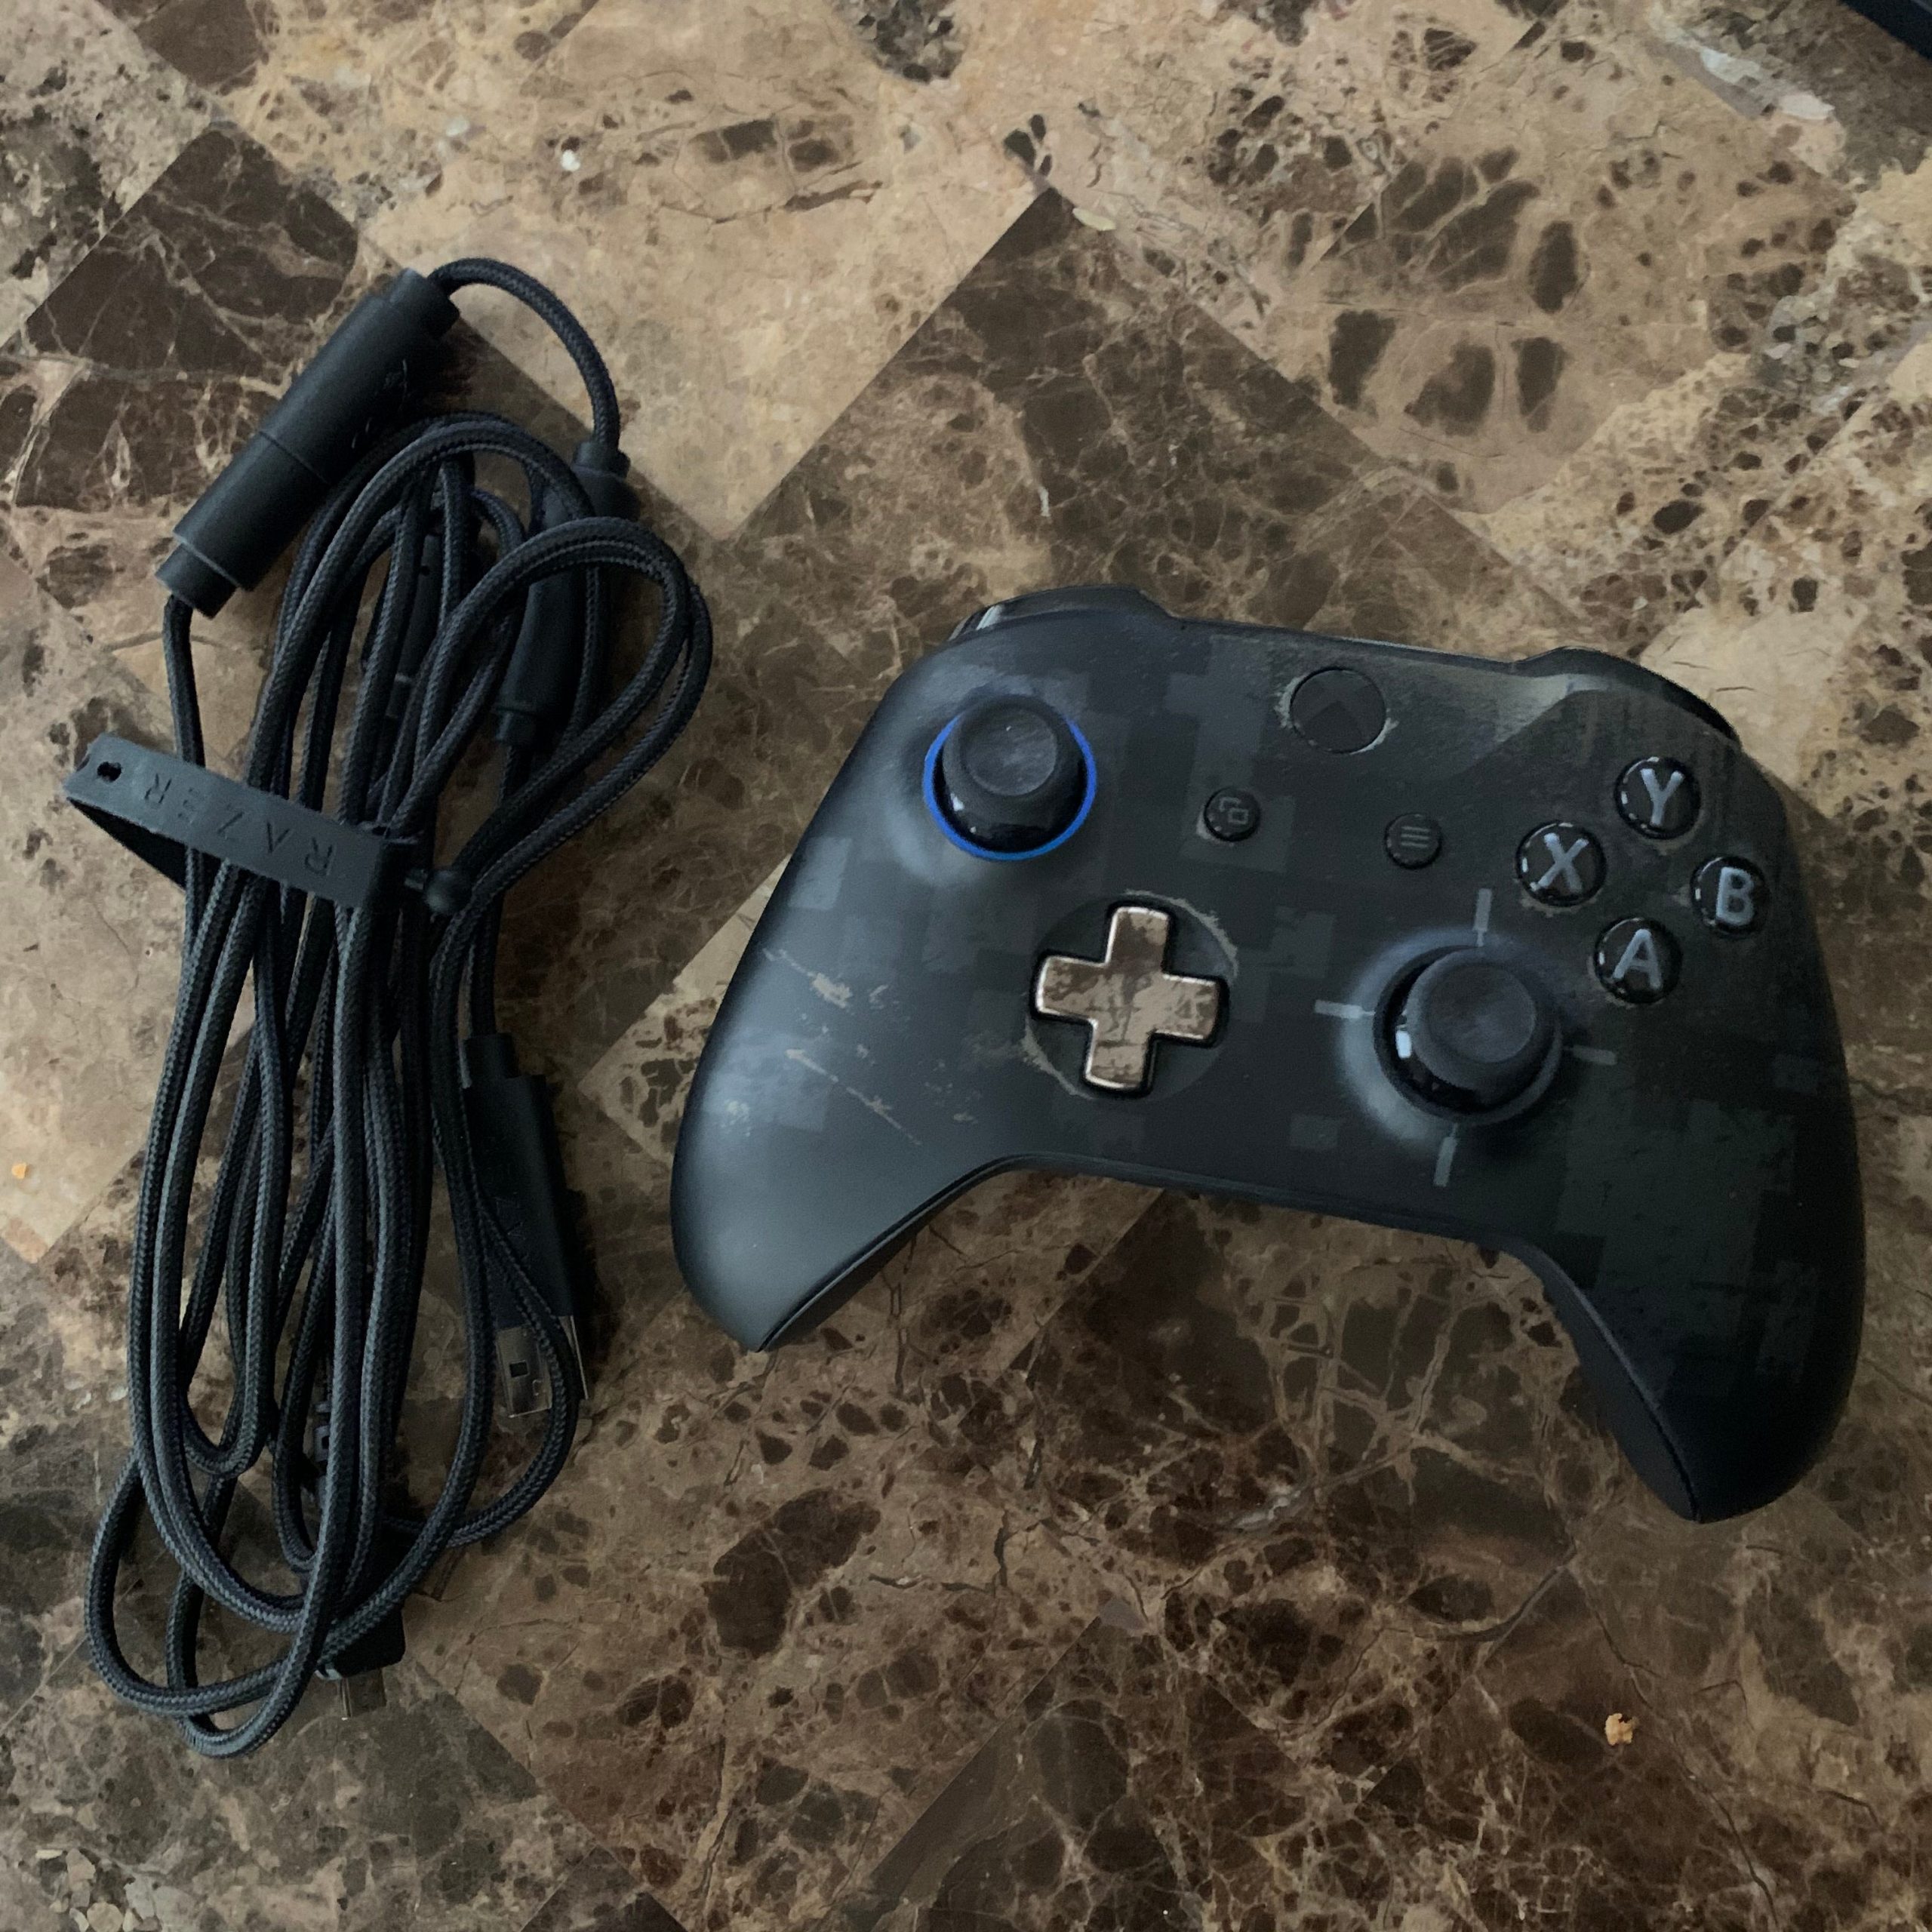 How to connect Xbox One controller to PC